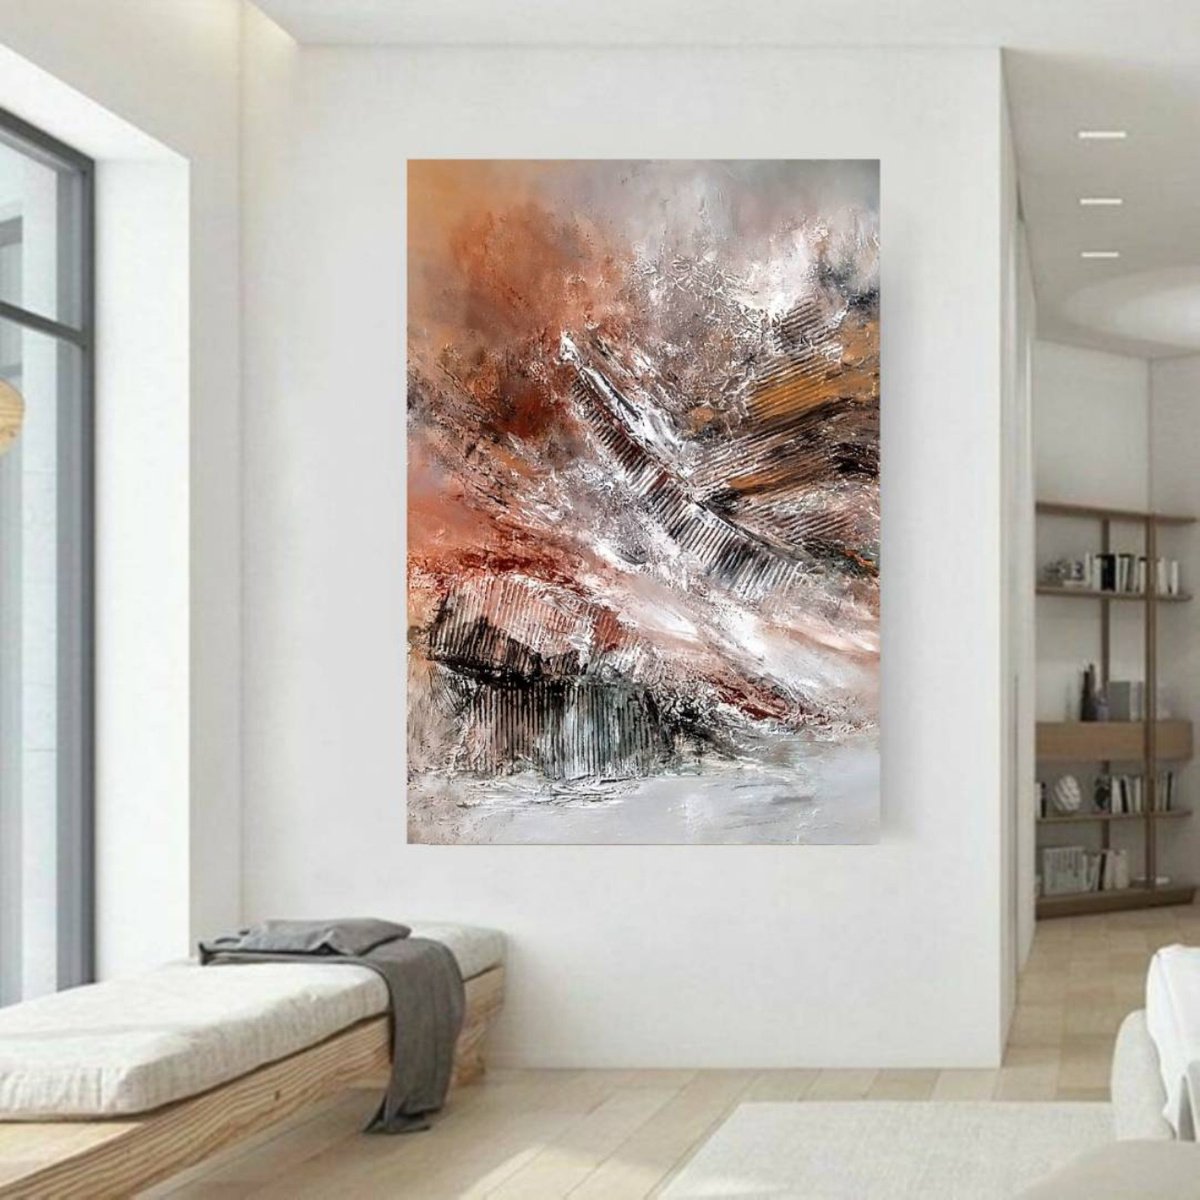 Let me free 70x100cm Abstract Textured Painting by Alexandra Petropoulou